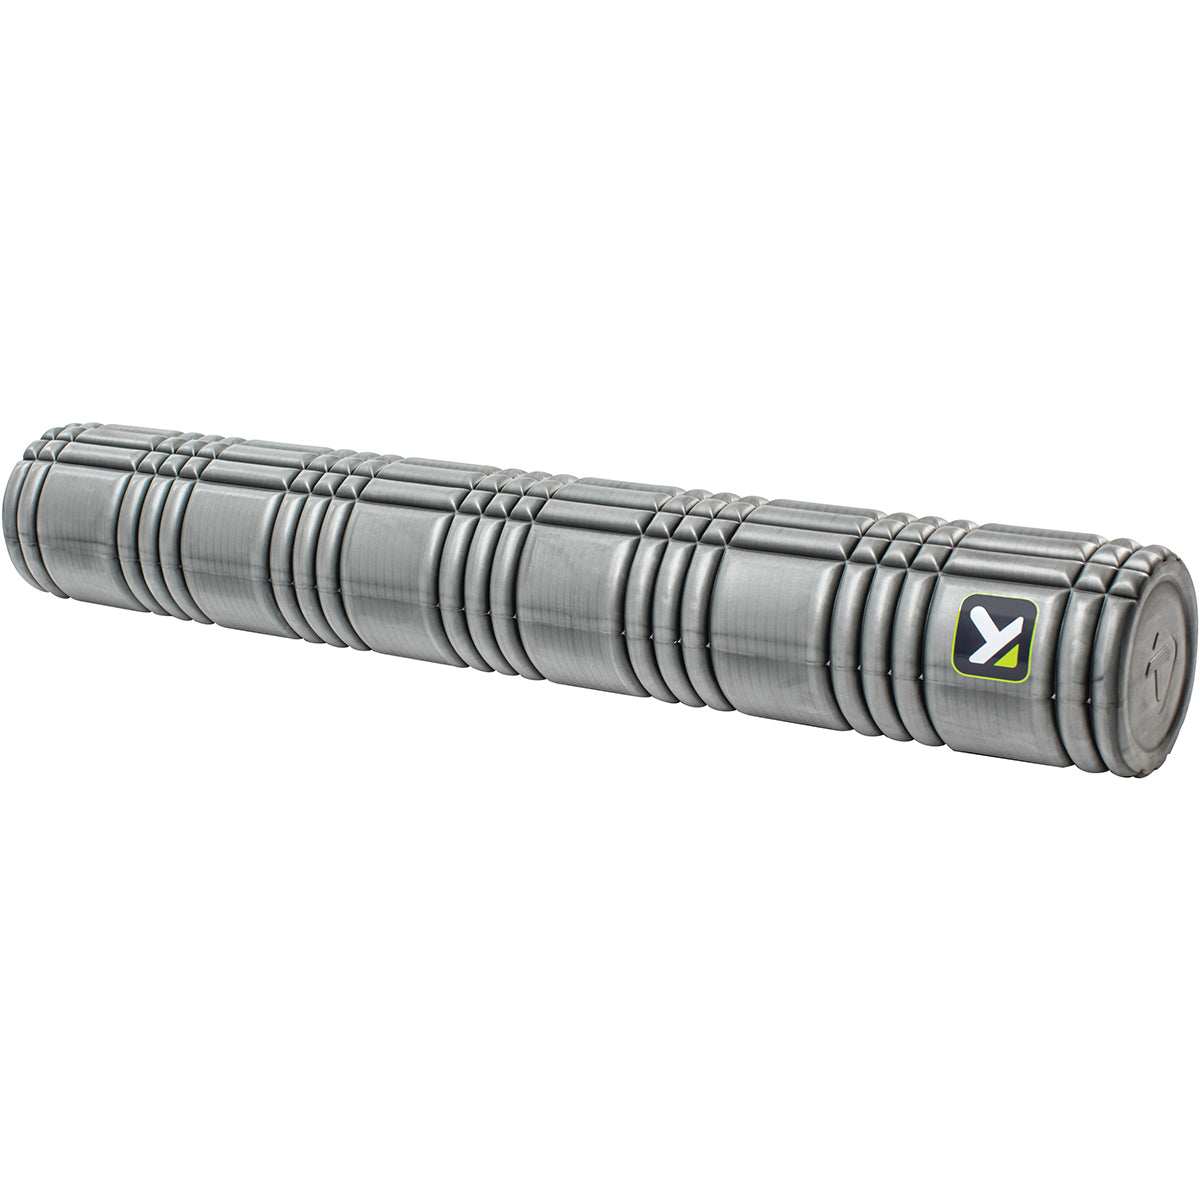 TriggerPoint 36" Solid Core Foam Roller - Gray TriggerPoint